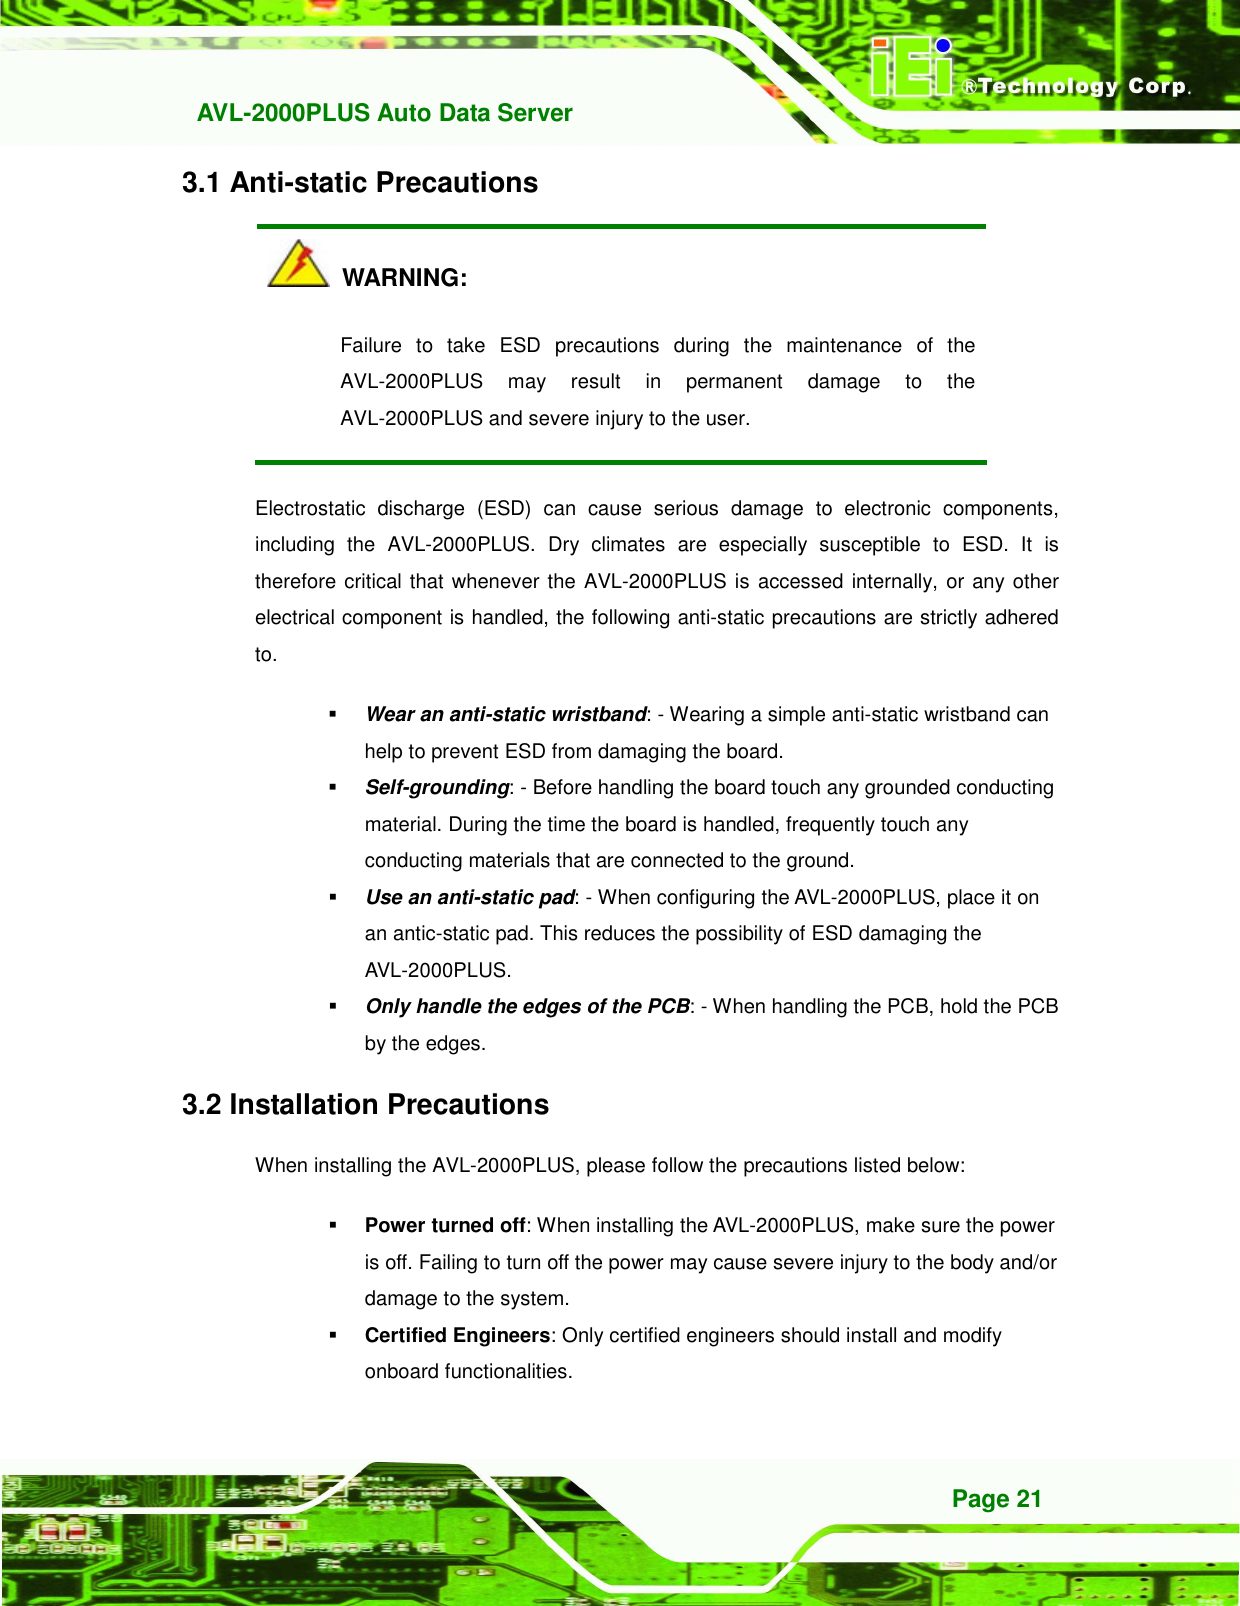   AVL-2000PLUS Auto Data Server Page 21 3.1 Anti-static Precautions   WARNING: Failure  to  take  ESD  precautions  during  the  maintenance  of  the AVL-2000PLUS  may  result  in  permanent  damage  to  the AVL-2000PLUS and severe injury to the user.   Electrostatic  discharge  (ESD)  can  cause  serious  damage  to  electronic  components, including  the  AVL-2000PLUS.  Dry  climates  are  especially  susceptible  to  ESD.  It  is therefore critical that whenever the AVL-2000PLUS is accessed internally, or any other electrical component is handled, the following anti-static precautions are strictly adhered to.  Wear an anti-static wristband: - Wearing a simple anti-static wristband can help to prevent ESD from damaging the board.  Self-grounding: - Before handling the board touch any grounded conducting material. During the time the board is handled, frequently touch any conducting materials that are connected to the ground.  Use an anti-static pad: - When configuring the AVL-2000PLUS, place it on an antic-static pad. This reduces the possibility of ESD damaging the AVL-2000PLUS.  Only handle the edges of the PCB: - When handling the PCB, hold the PCB by the edges. 3.2 Installation Precautions When installing the AVL-2000PLUS, please follow the precautions listed below:  Power turned off: When installing the AVL-2000PLUS, make sure the power is off. Failing to turn off the power may cause severe injury to the body and/or damage to the system.  Certified Engineers: Only certified engineers should install and modify onboard functionalities.   